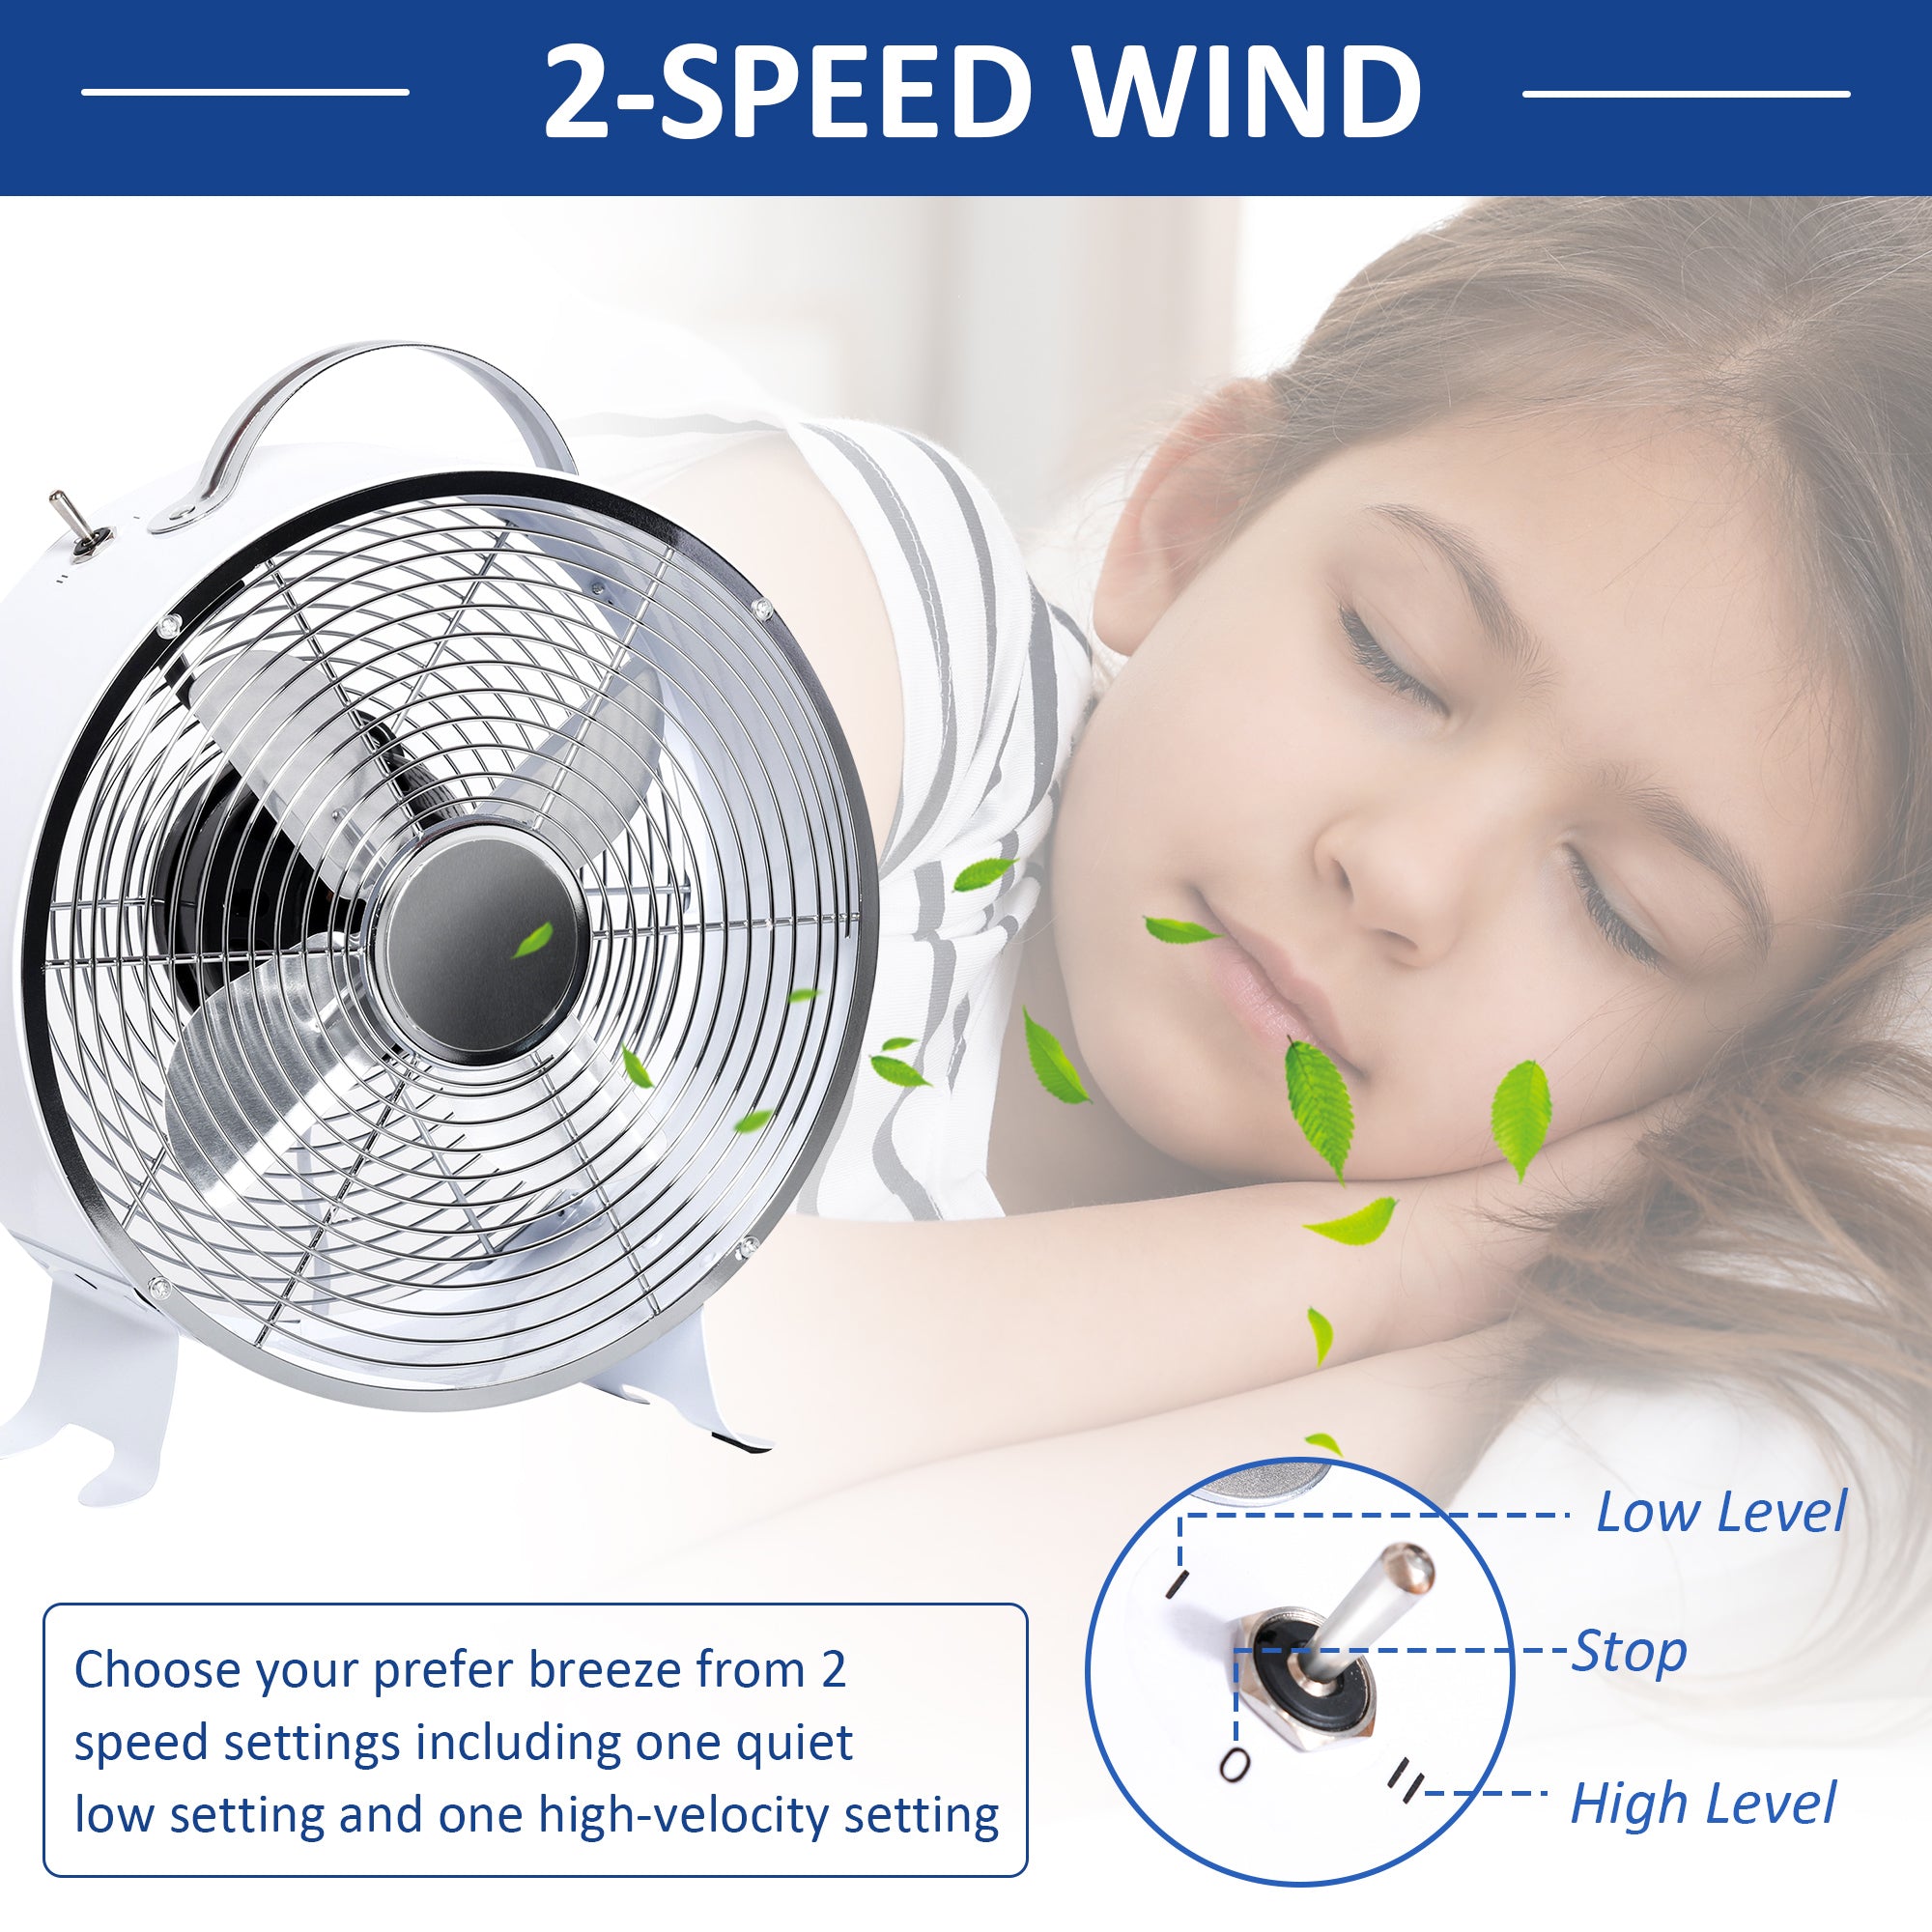 HOMCOM 26cm 2-Speed Electric Table Desk Fan w/ Safety Guard Anti-Slip Feet Portable Personal Cooling Fan Home Office Bedroom White - Inspirely